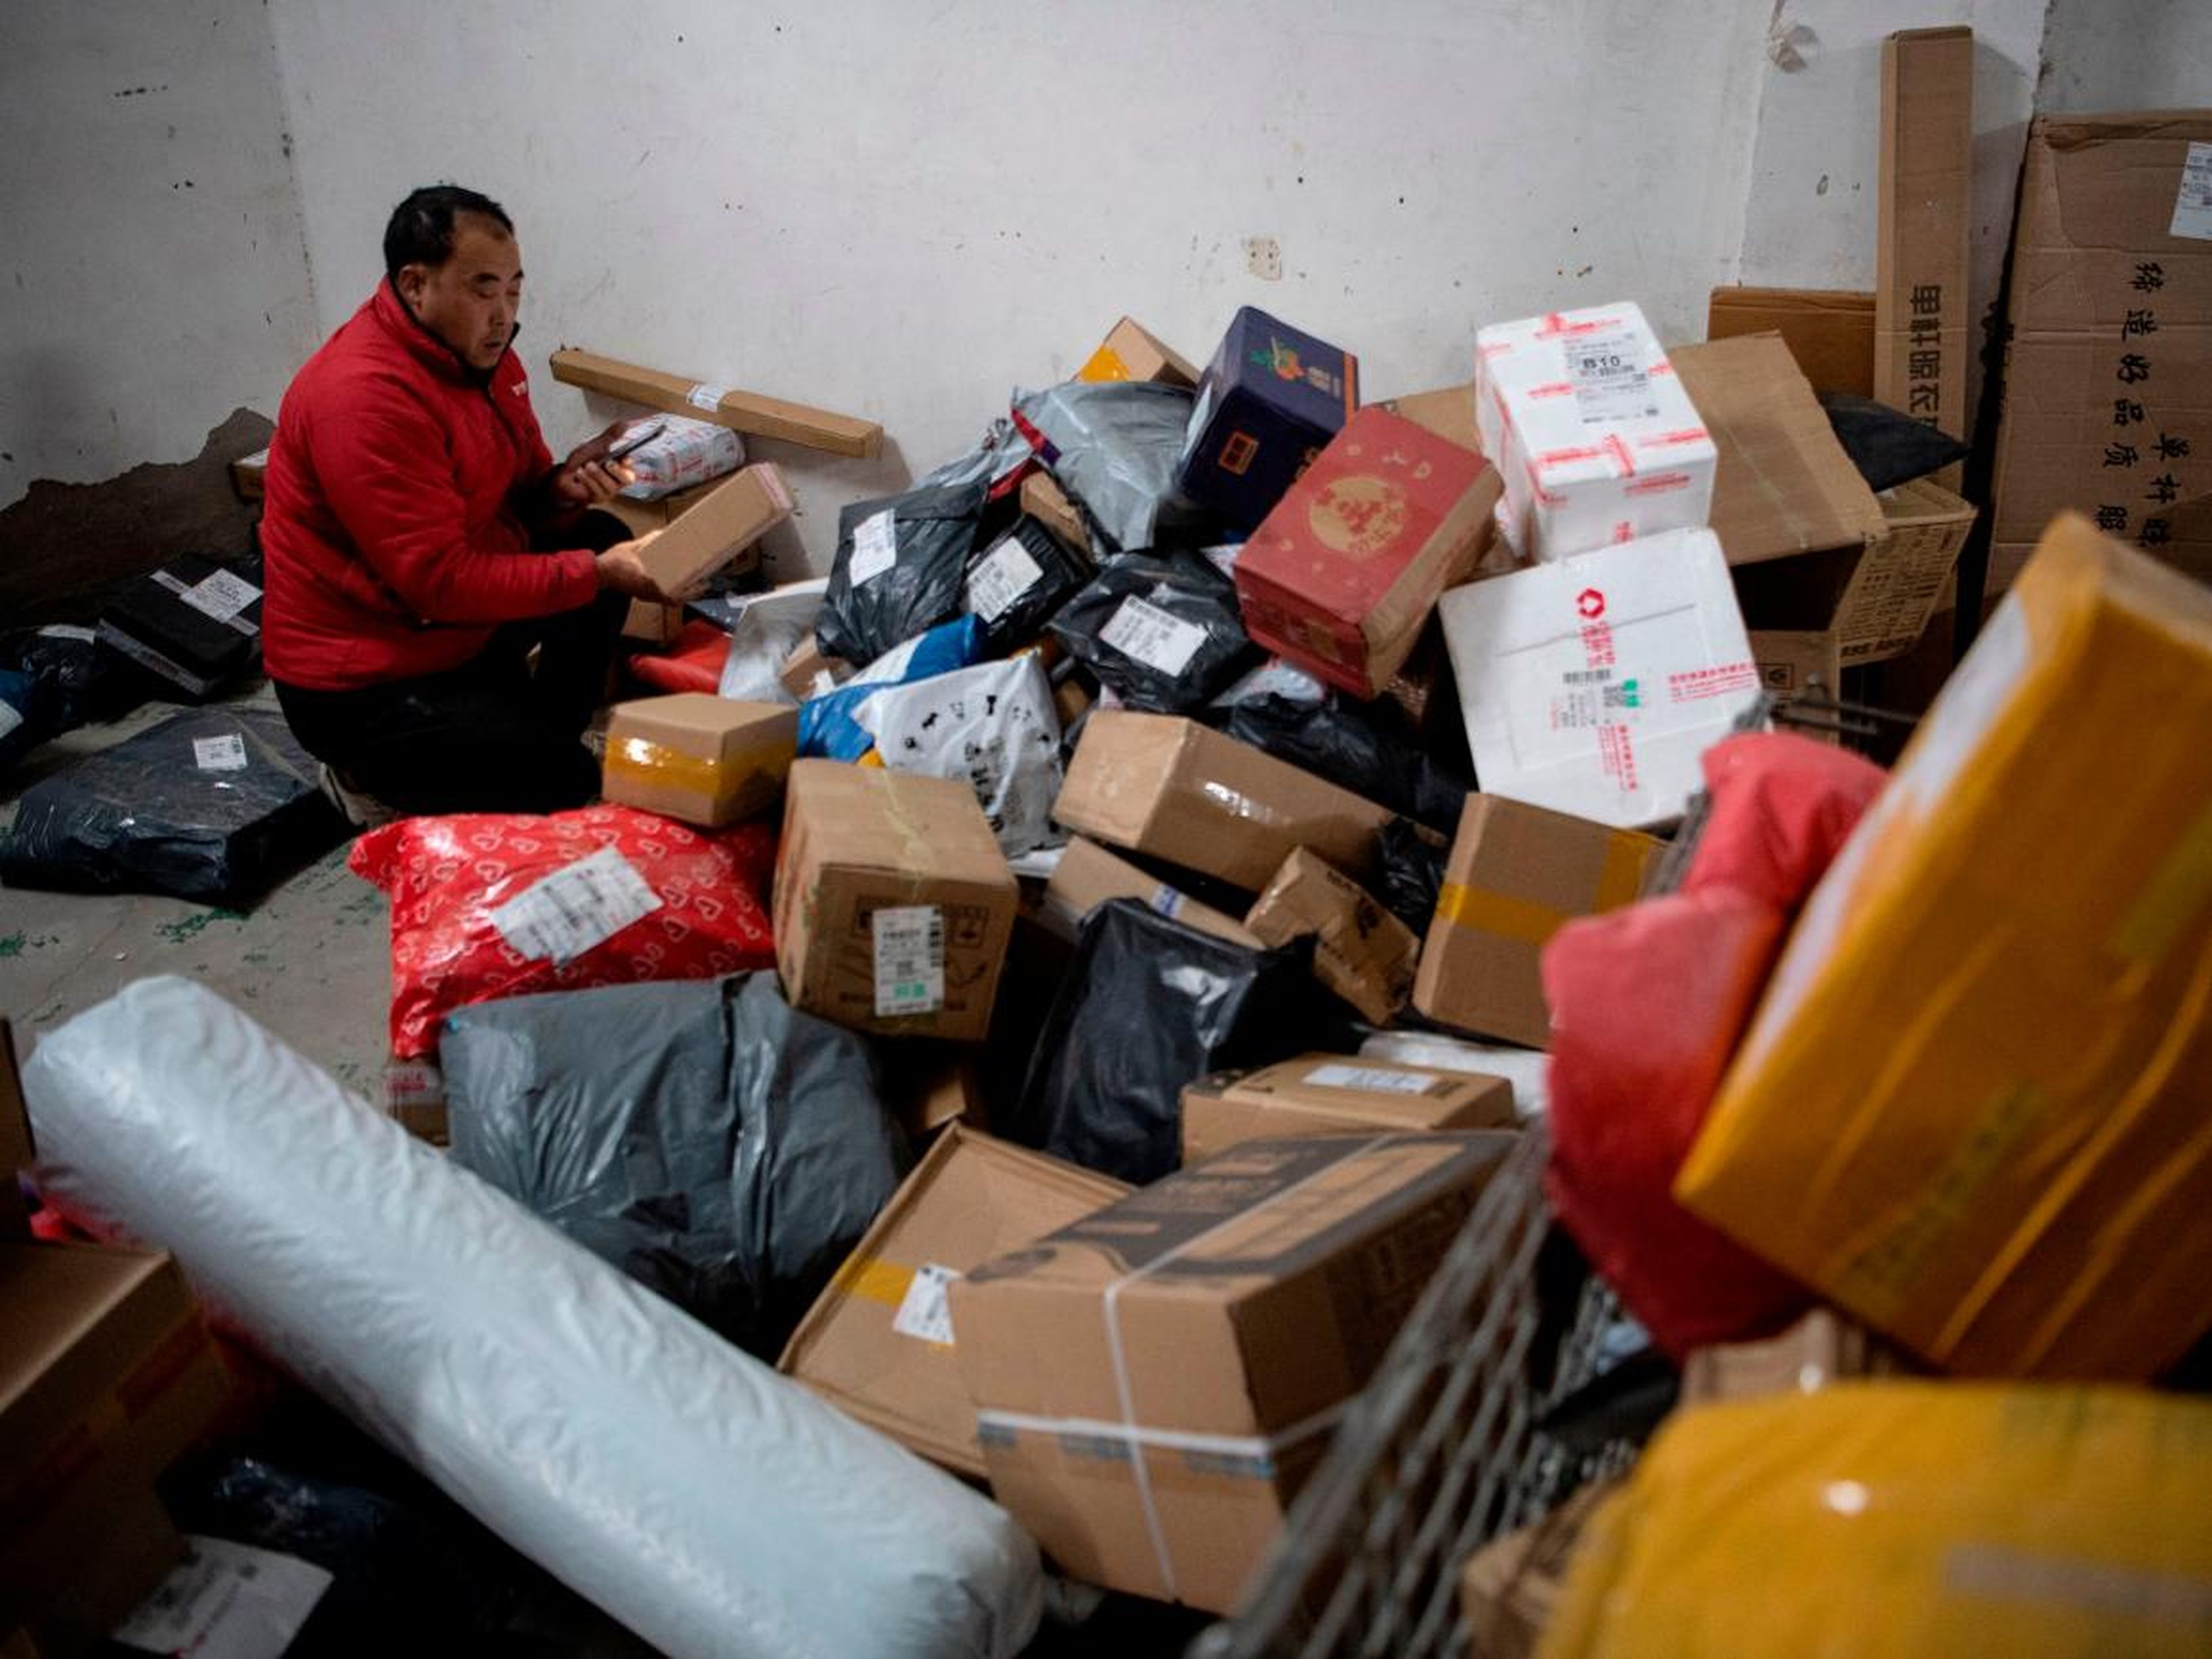 Workers in chaotic-looking warehouses appear to be struggling to keep up with the large number of Singles' Day orders.